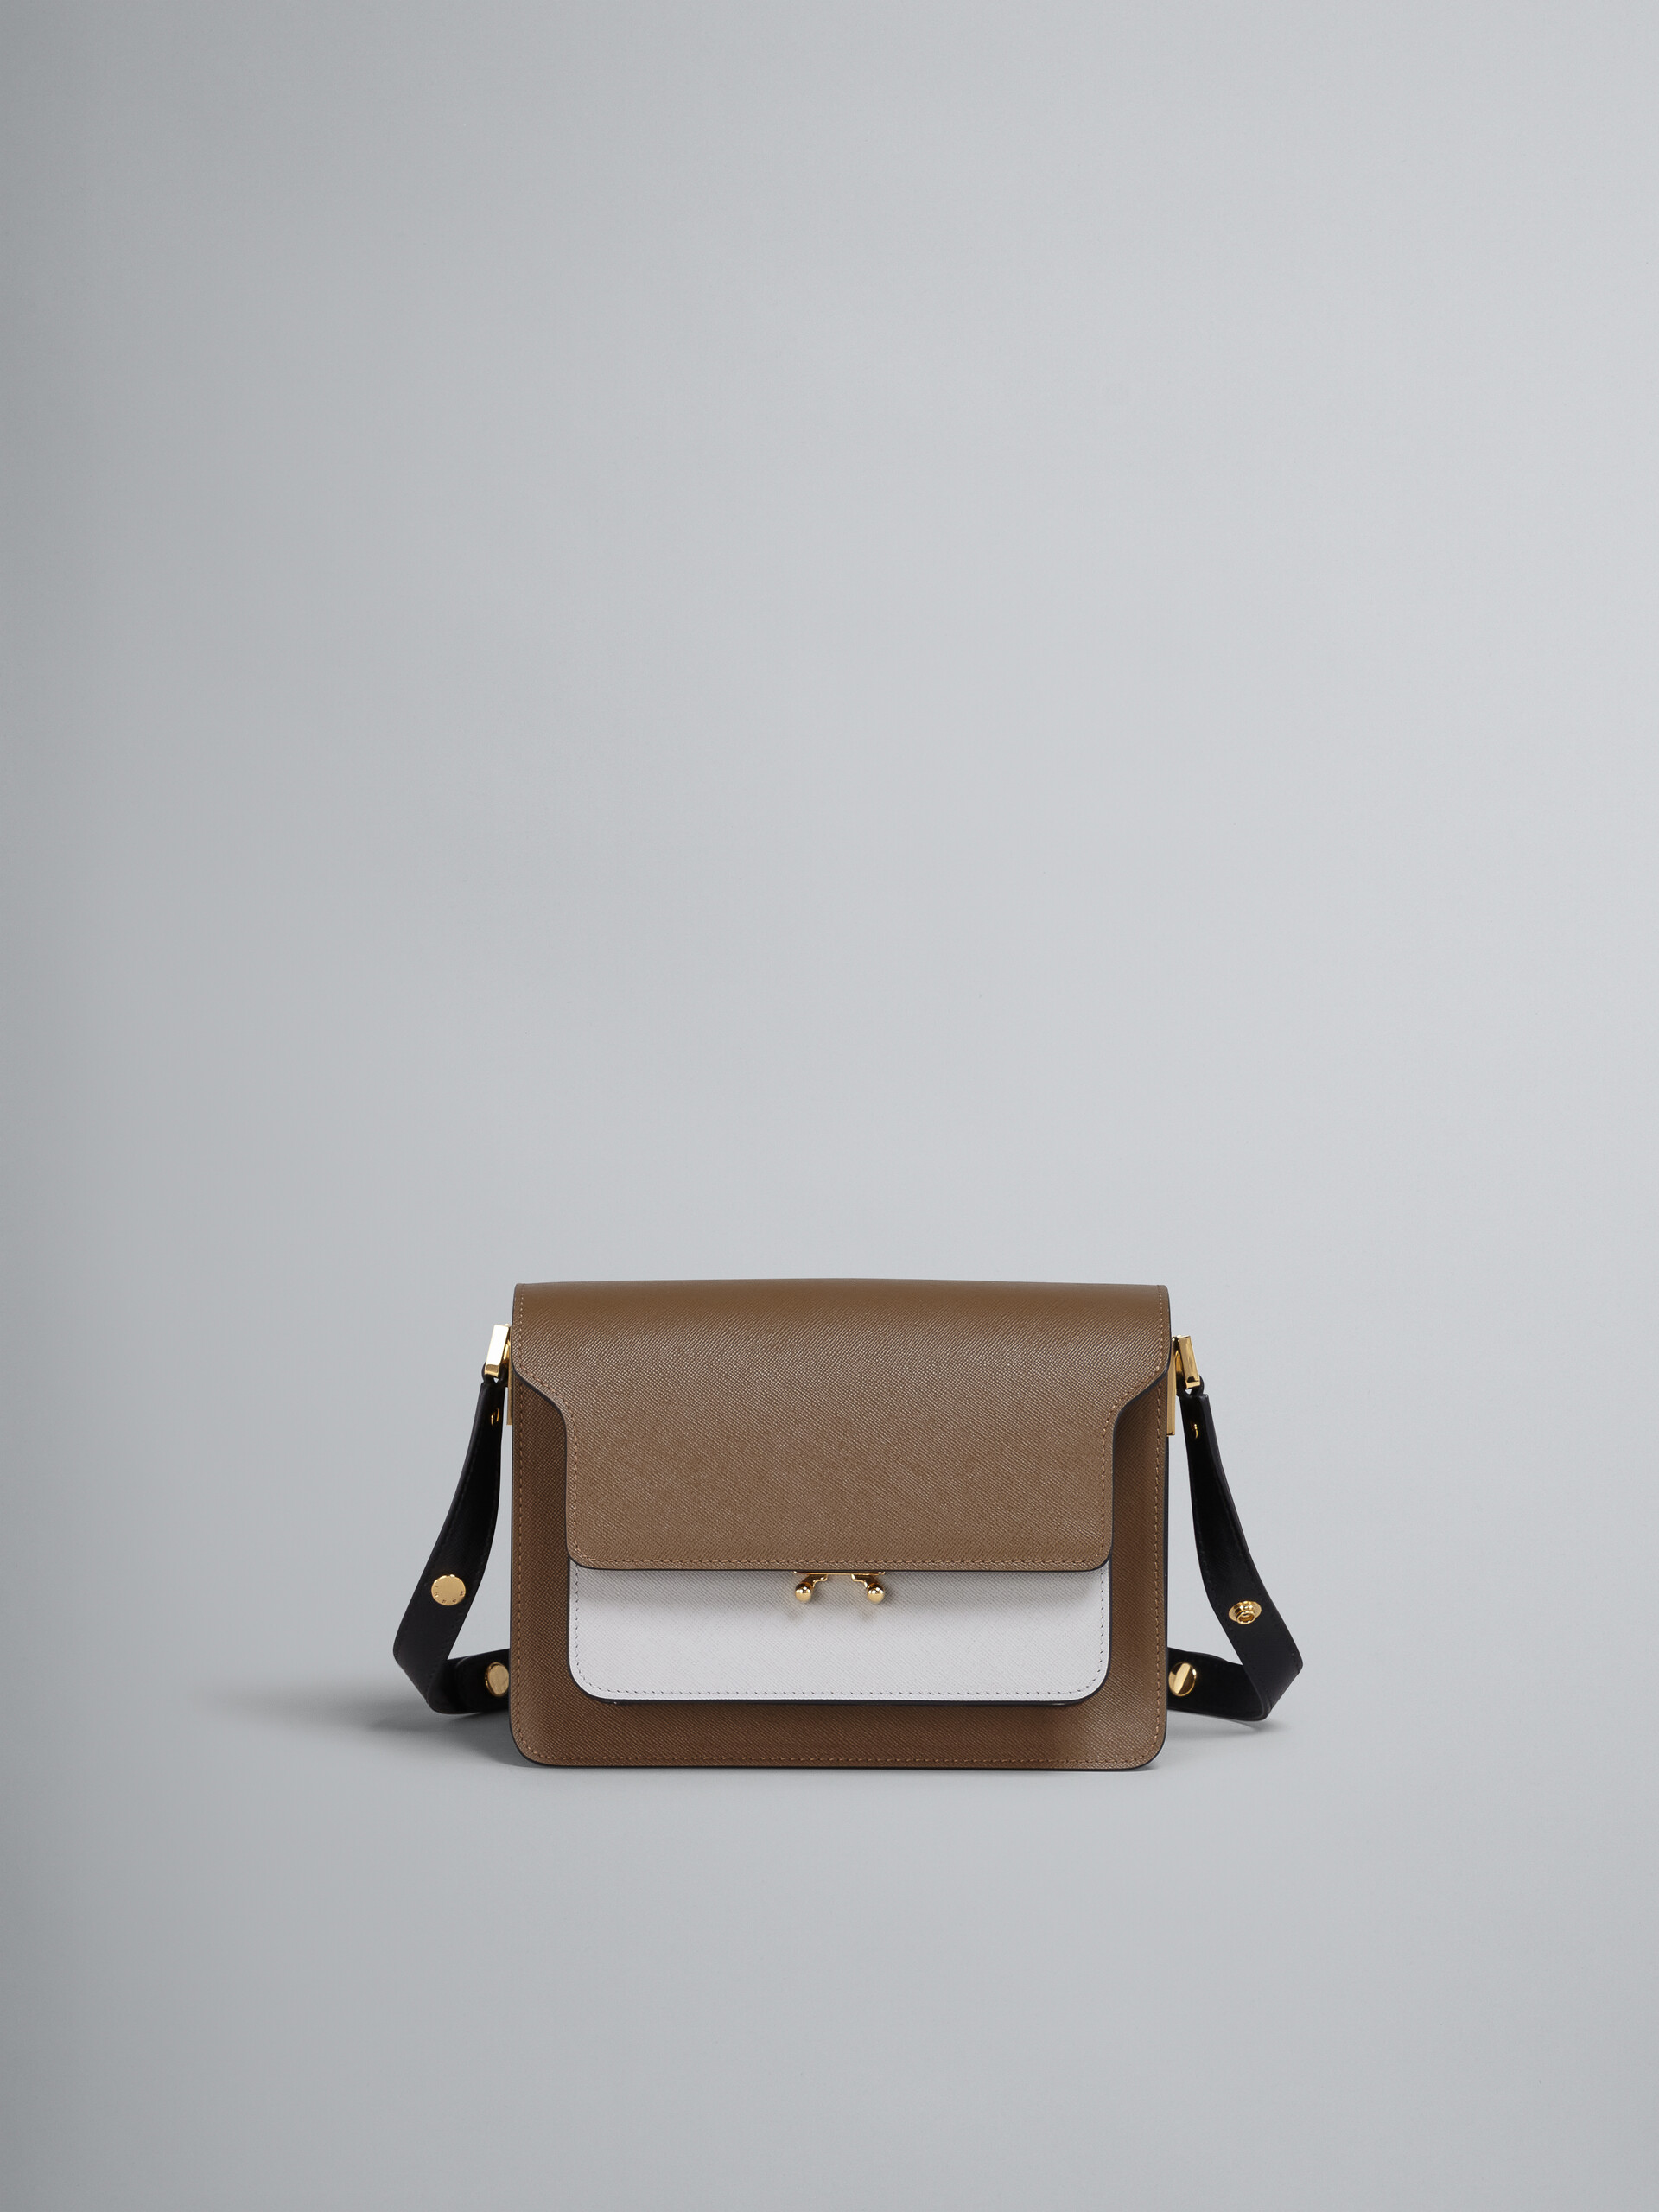 TRUNK bag in saffiano calf brown white and black - Shoulder Bags - Image 1